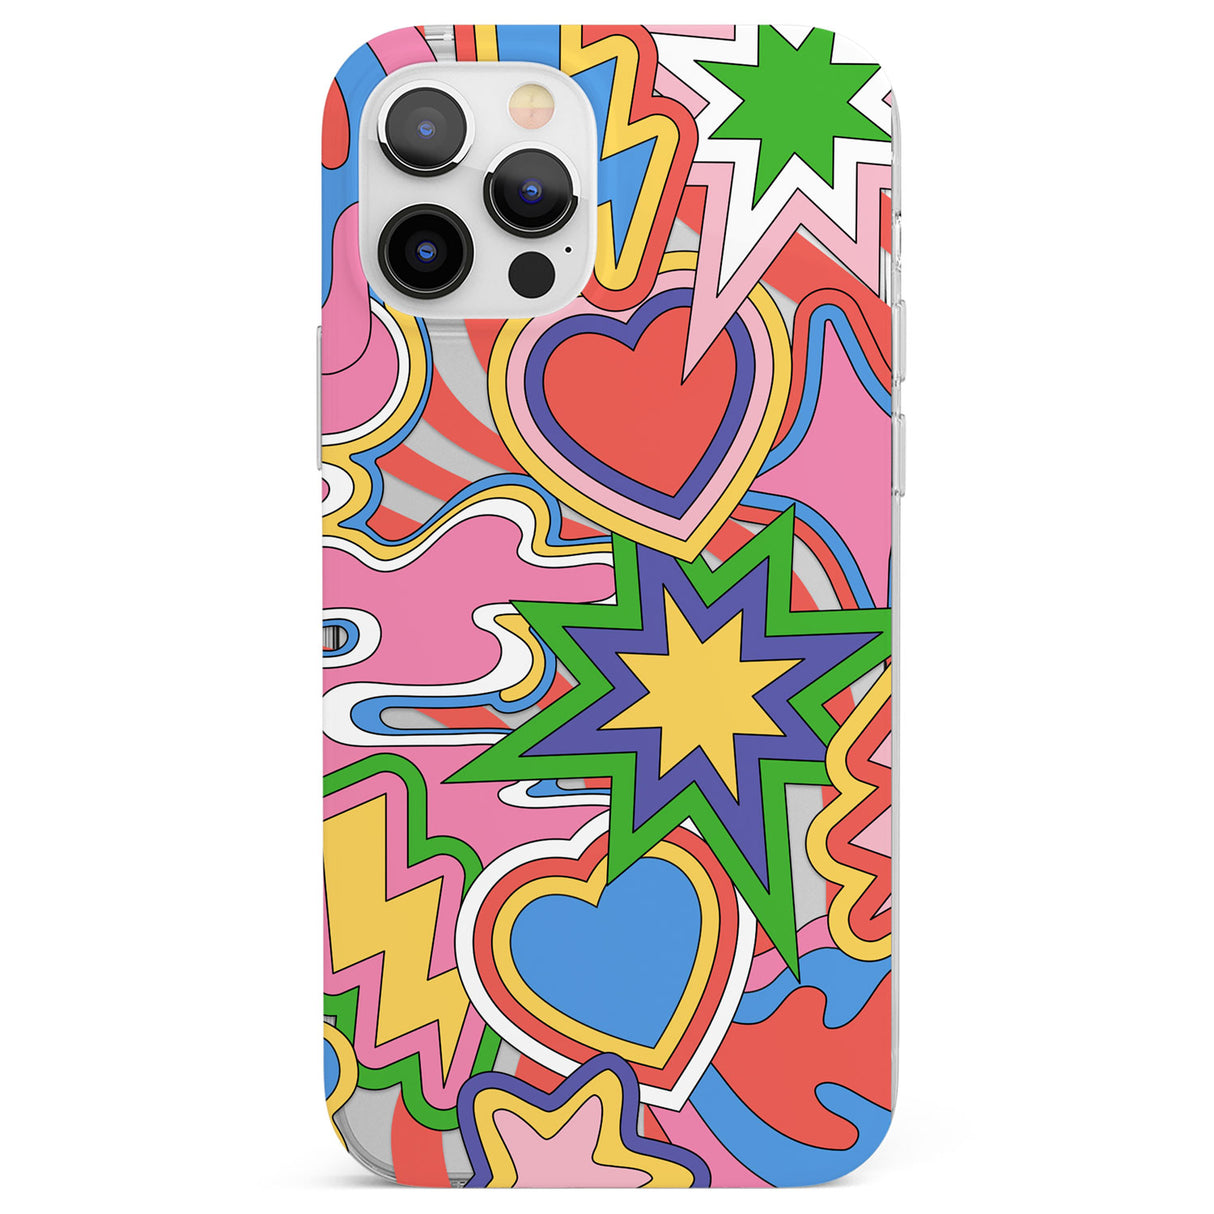 Psychedelic Pop Art Explosion Phone Case for iPhone 12 Pro